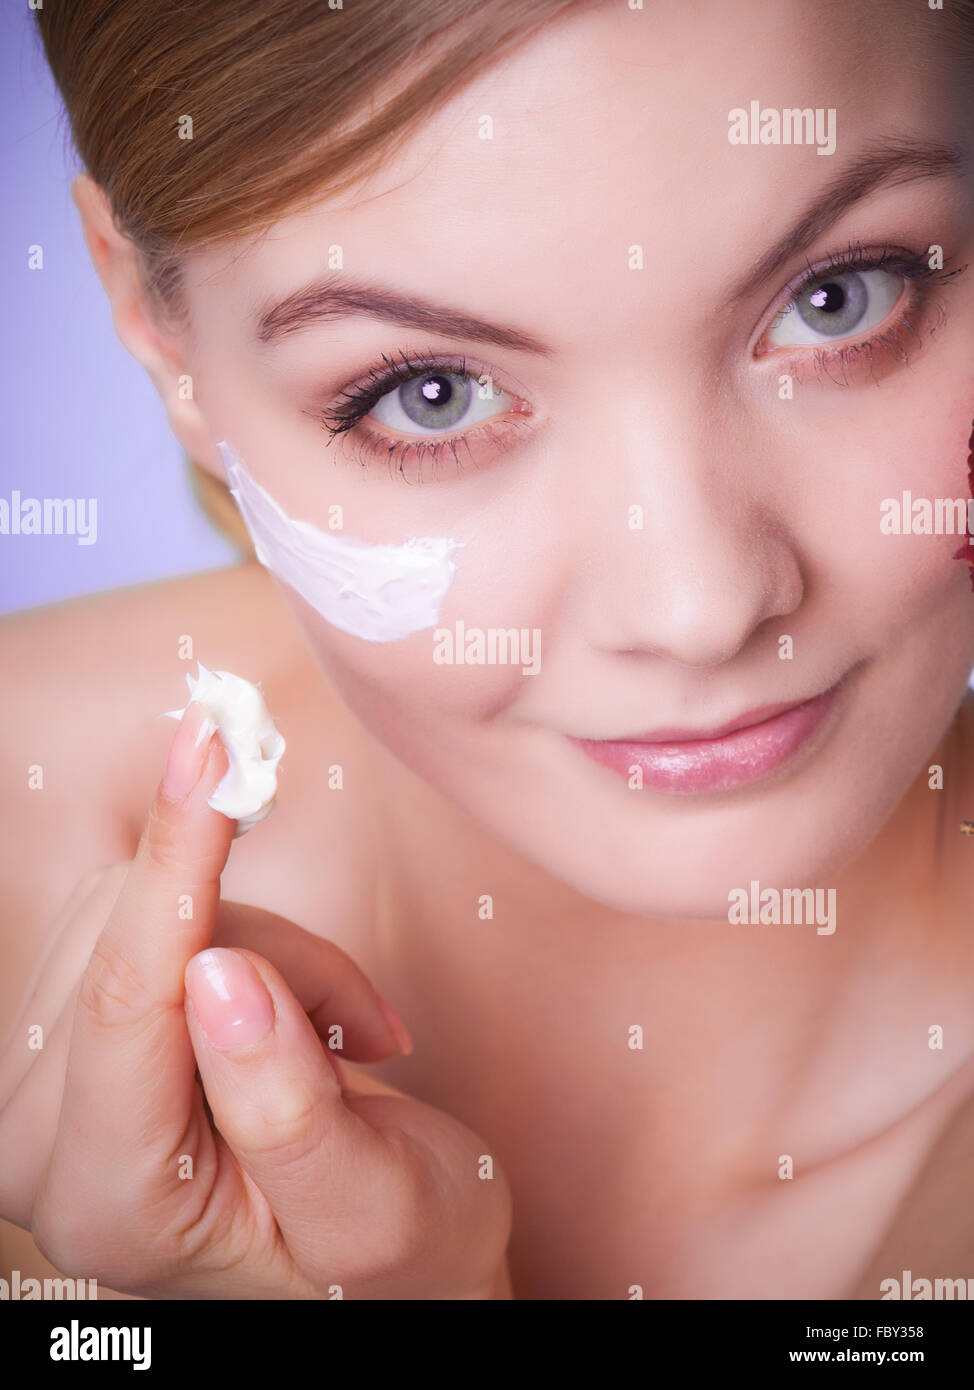 Skincare. Face of young woman girl taking care of dry skin. Stock Photo